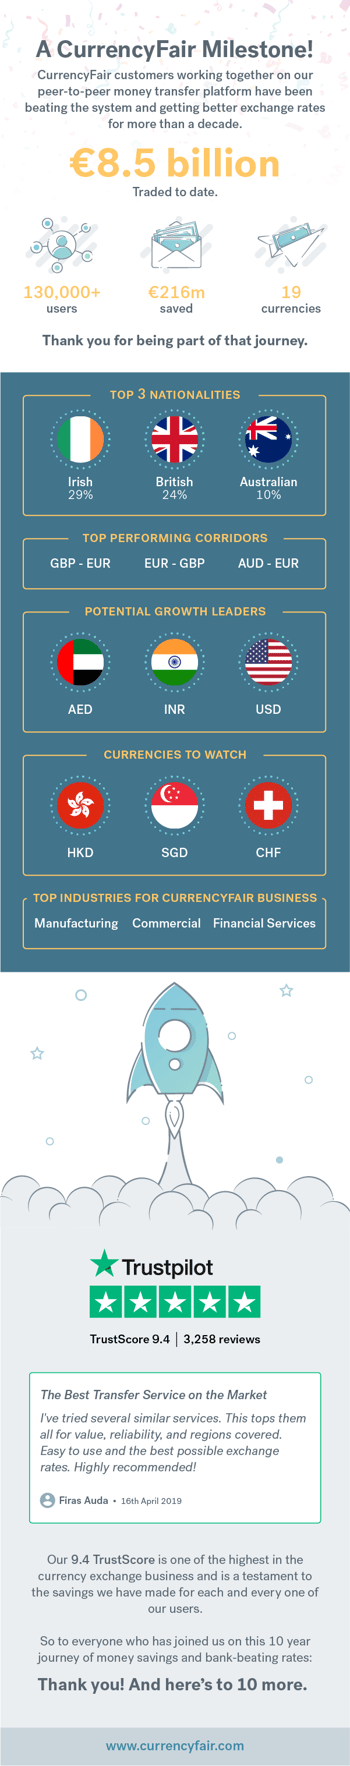 currencyfair infographic 10 years in business